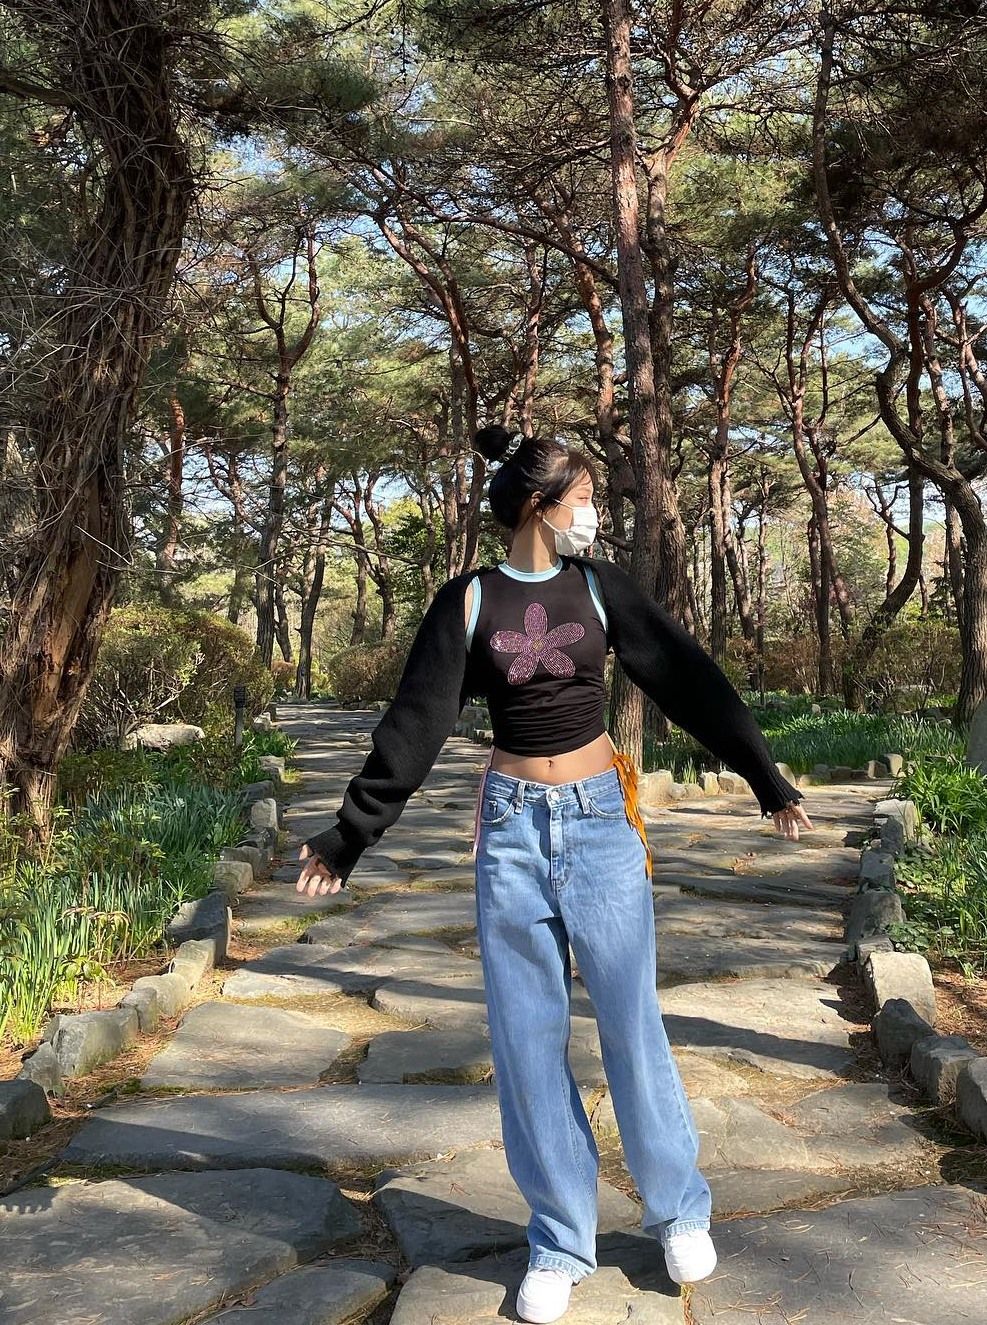 20 Ide Outfit Liburan ala Member BLACKPINK, Stylish Abis! 